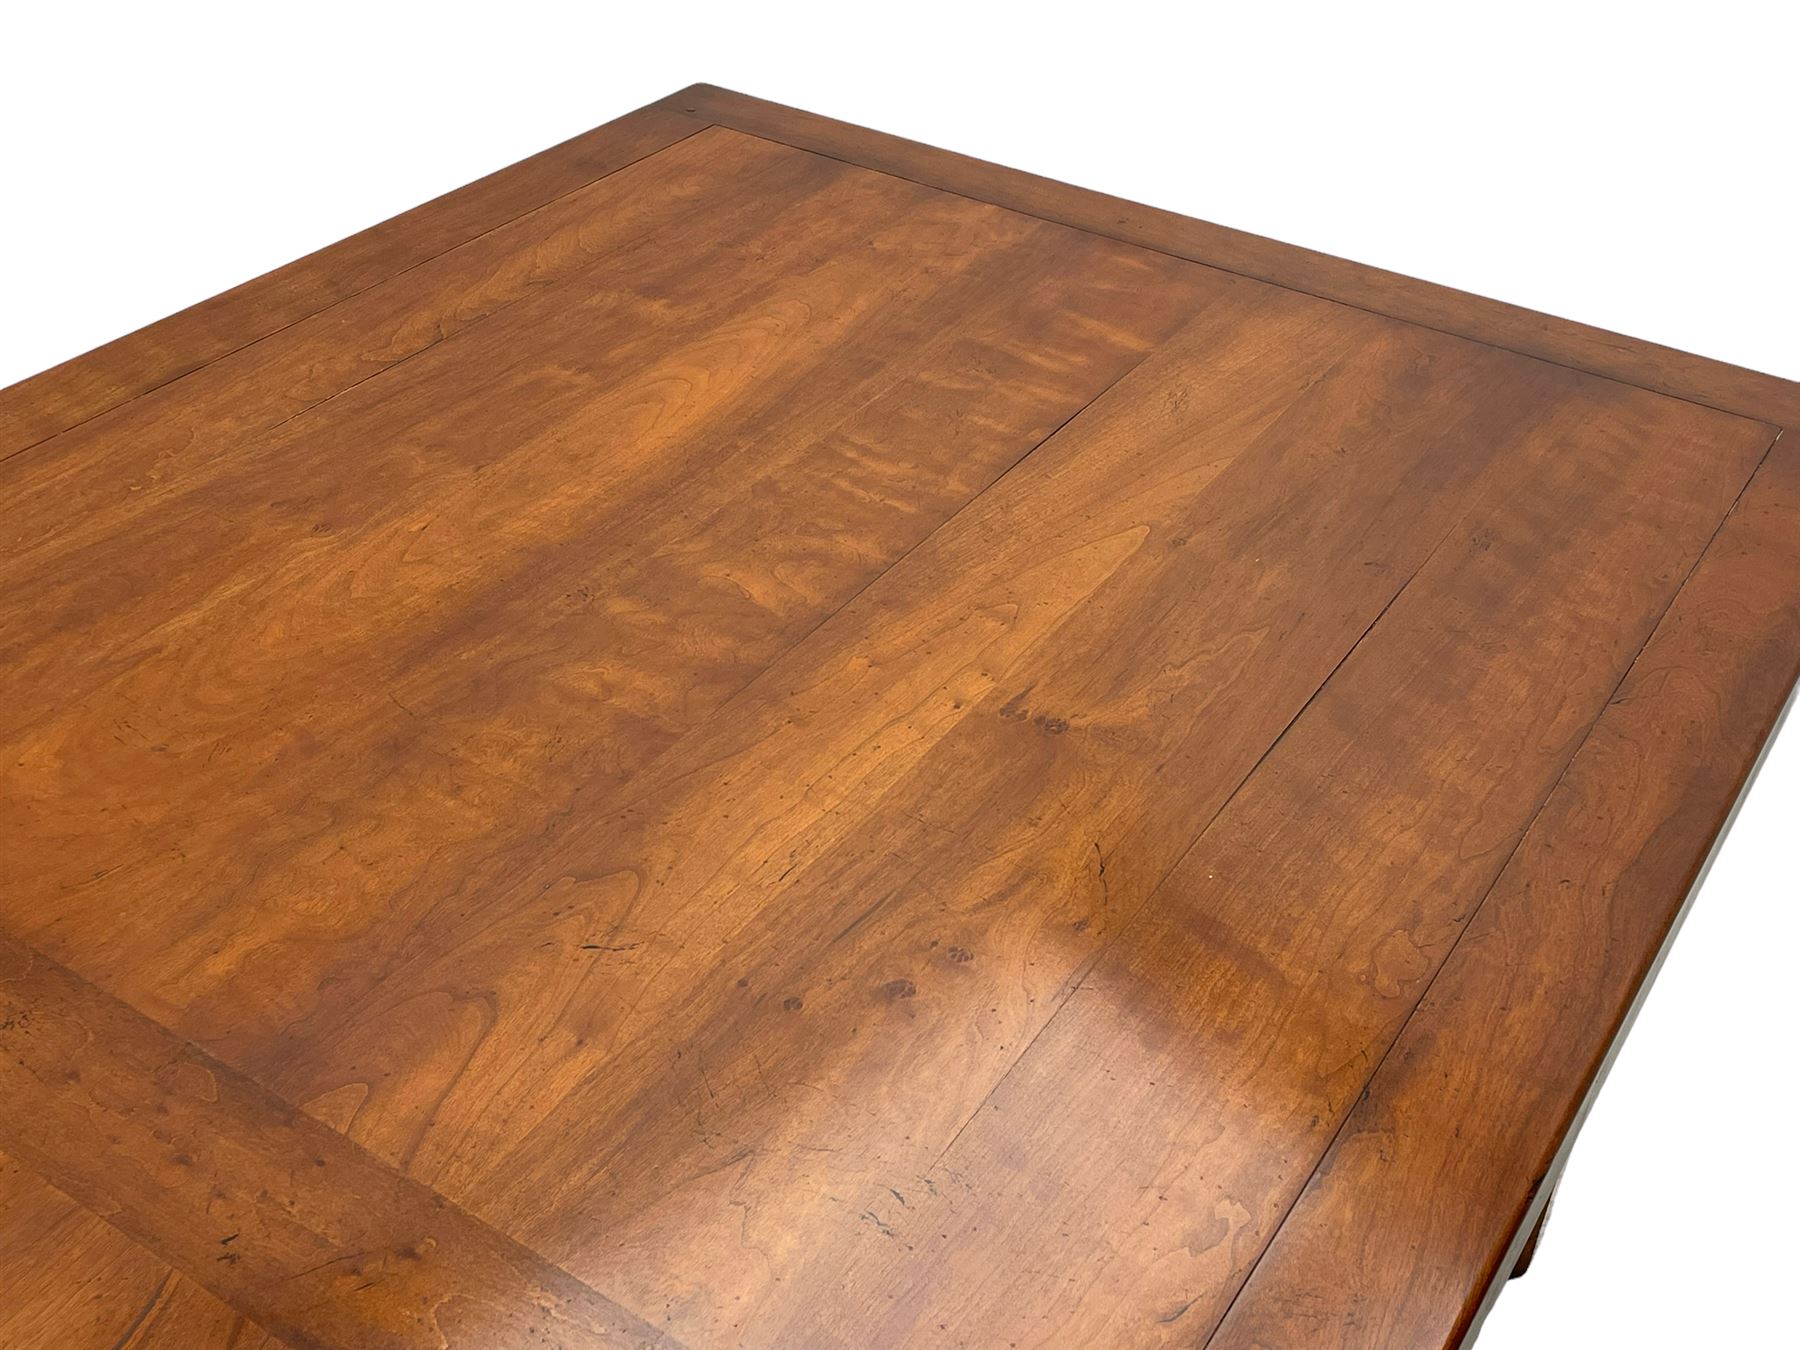 Contemporary French farmhouse design cherry wood dining table - Image 5 of 10